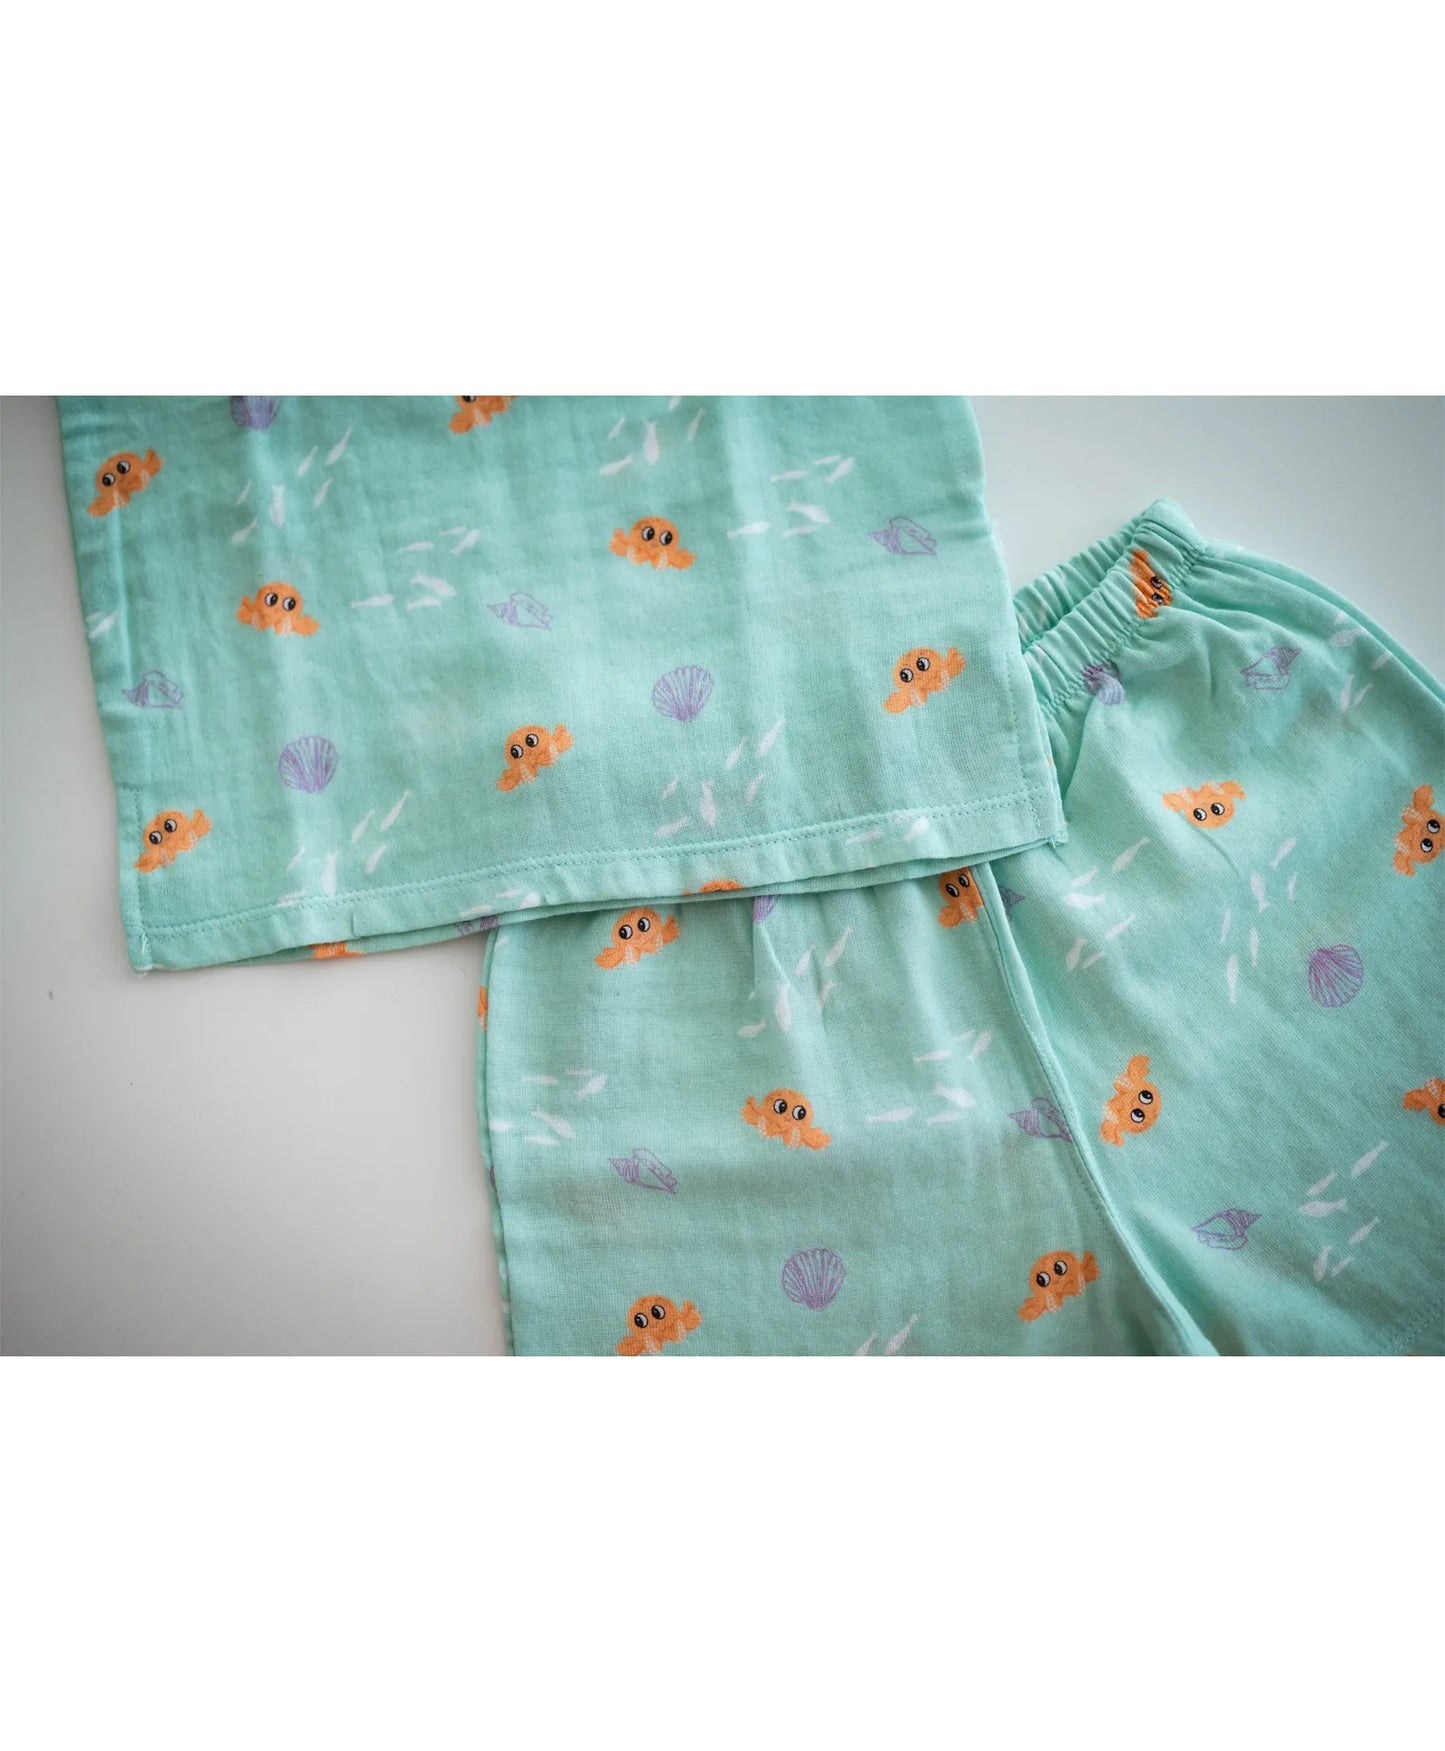 Tickle Tickle Organic Muslin Baby Shorts and Tee Set - Lil Octy - Laadlee